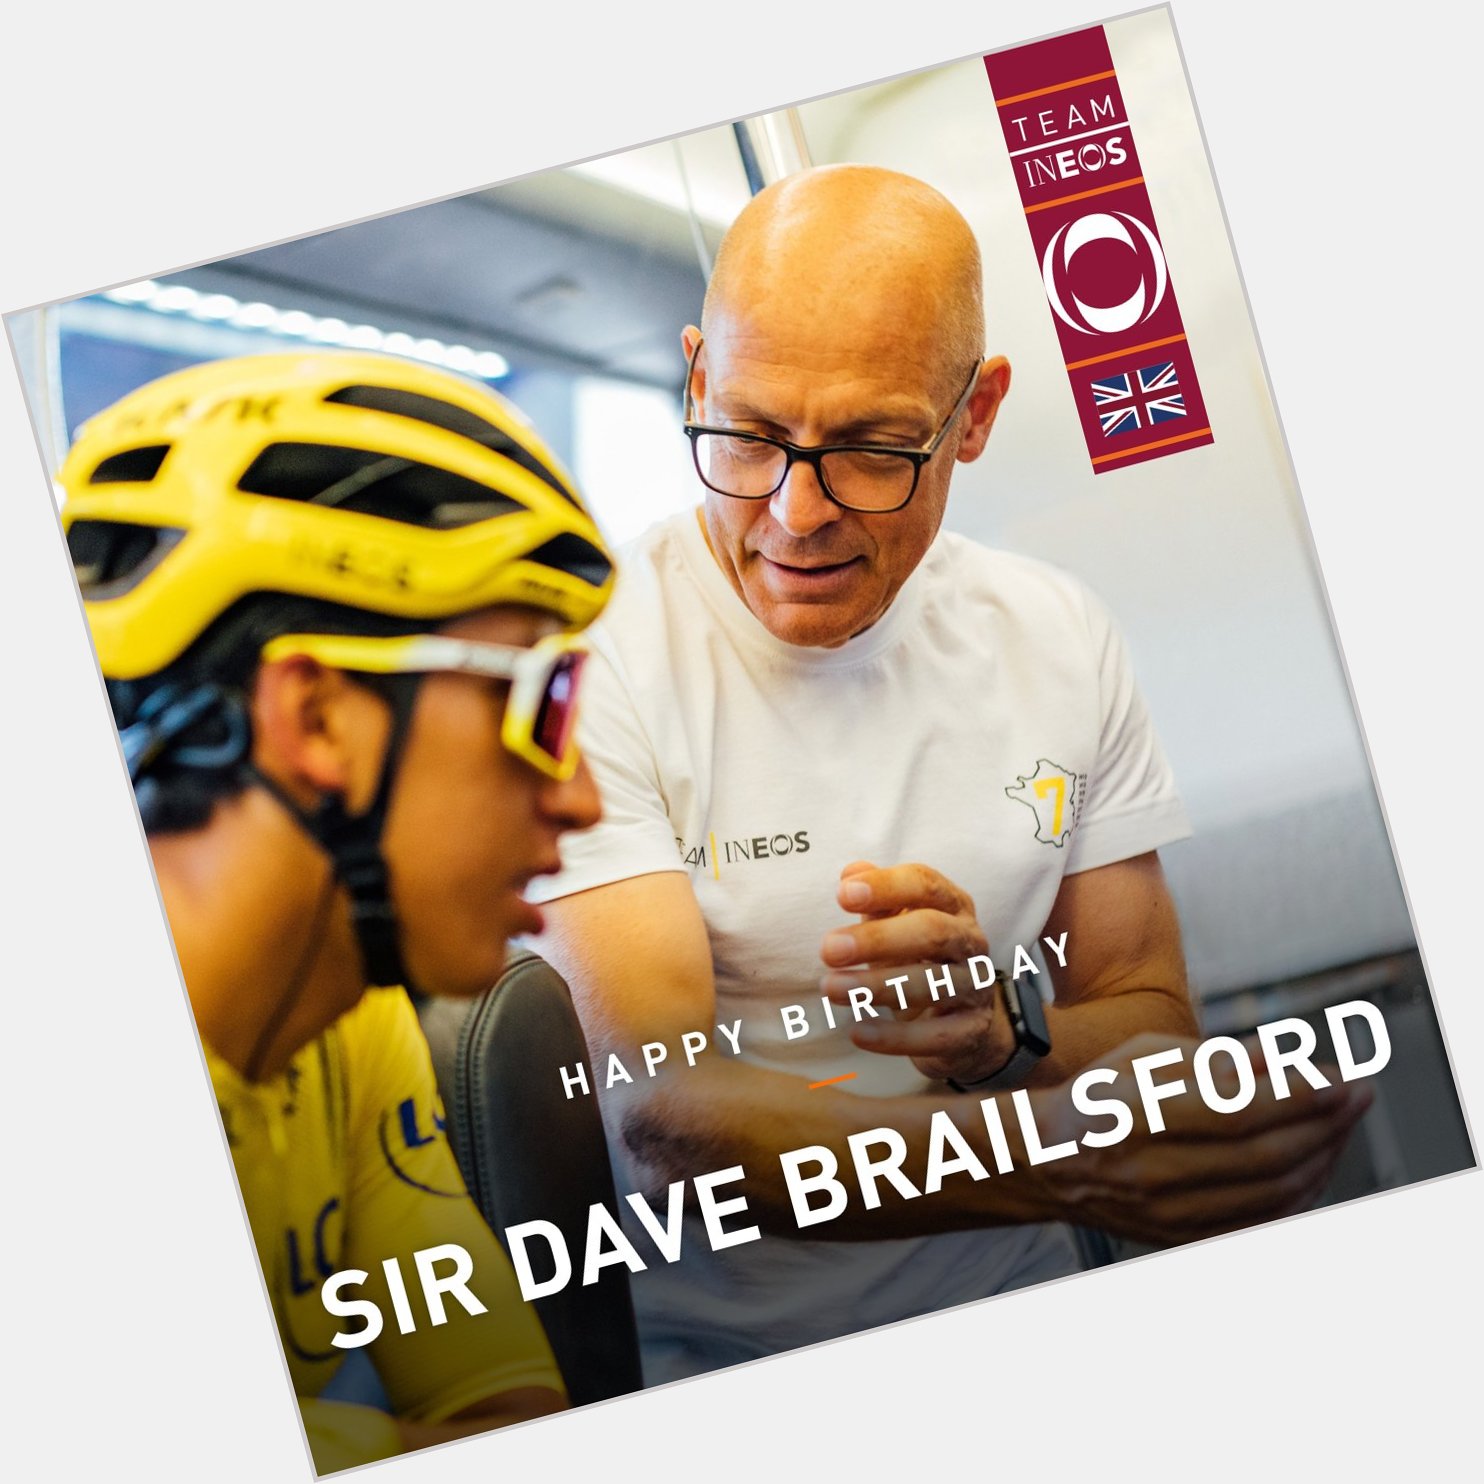 Happy Birthday to Sir Dave Brailsford. Born on a leap year, he turns 56 (or 14!) today 